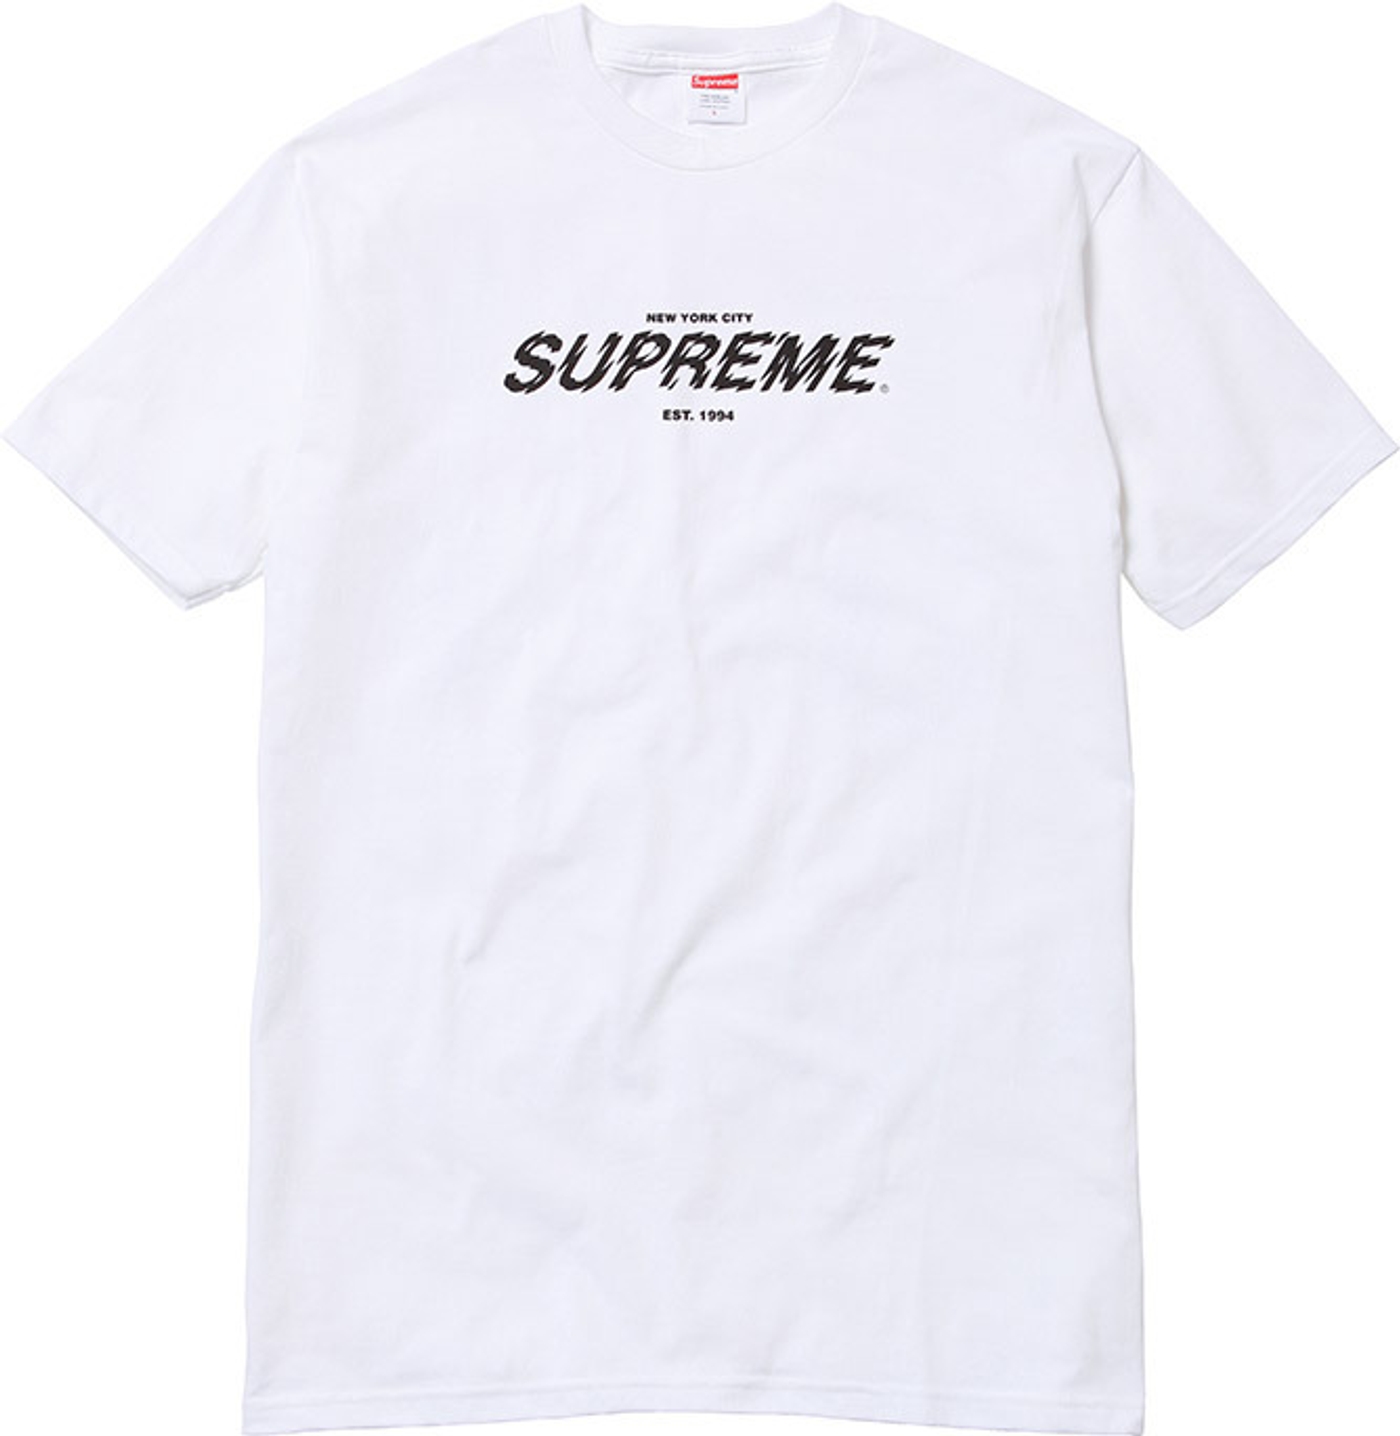 77 Tee 
All cotton classic Supreme t-shirt (5/5)